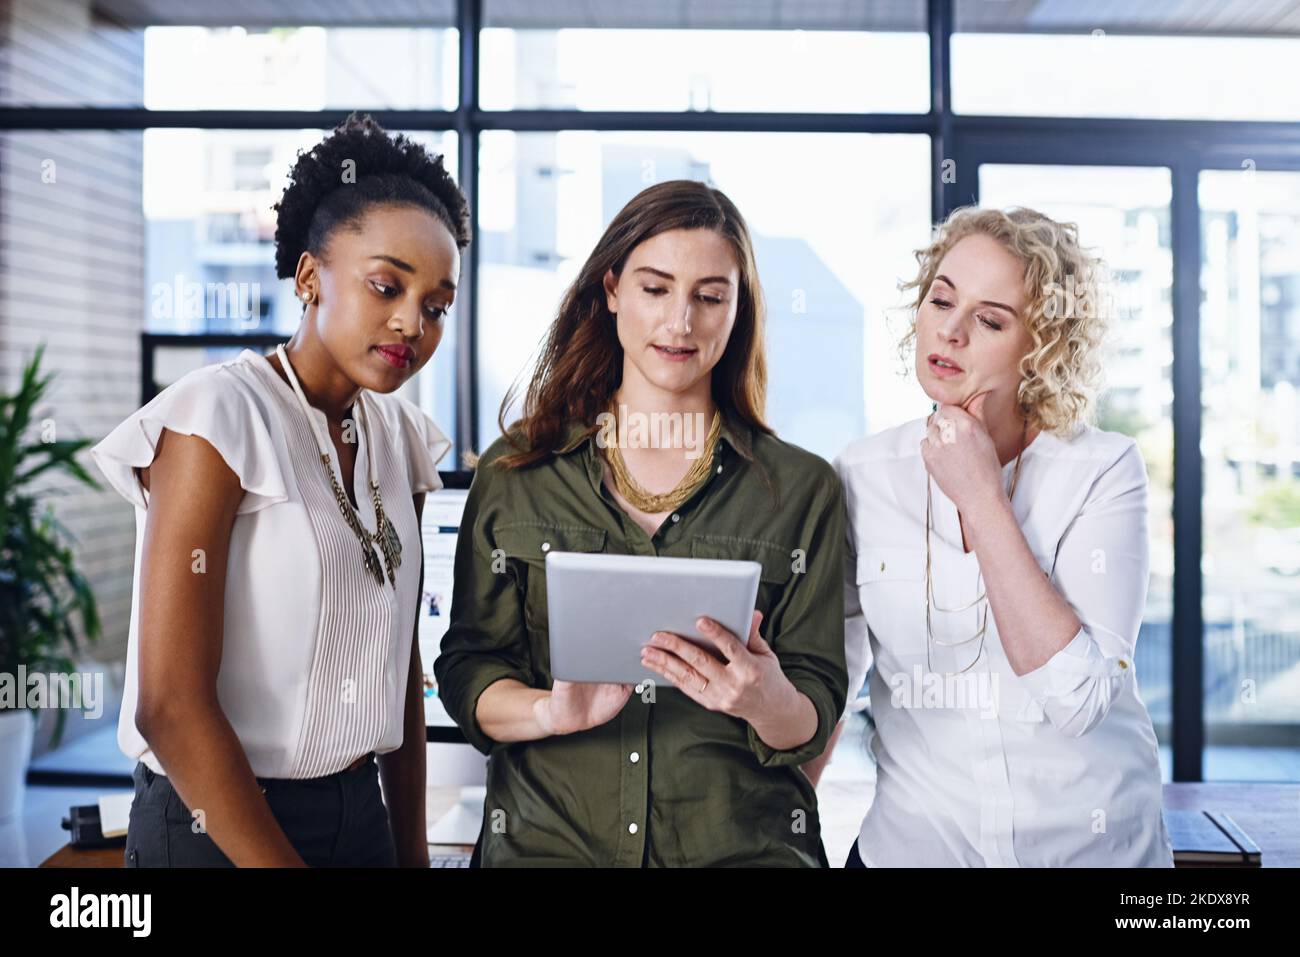 Considering all their options very carefully. a team of designers working together in the office. Stock Photo